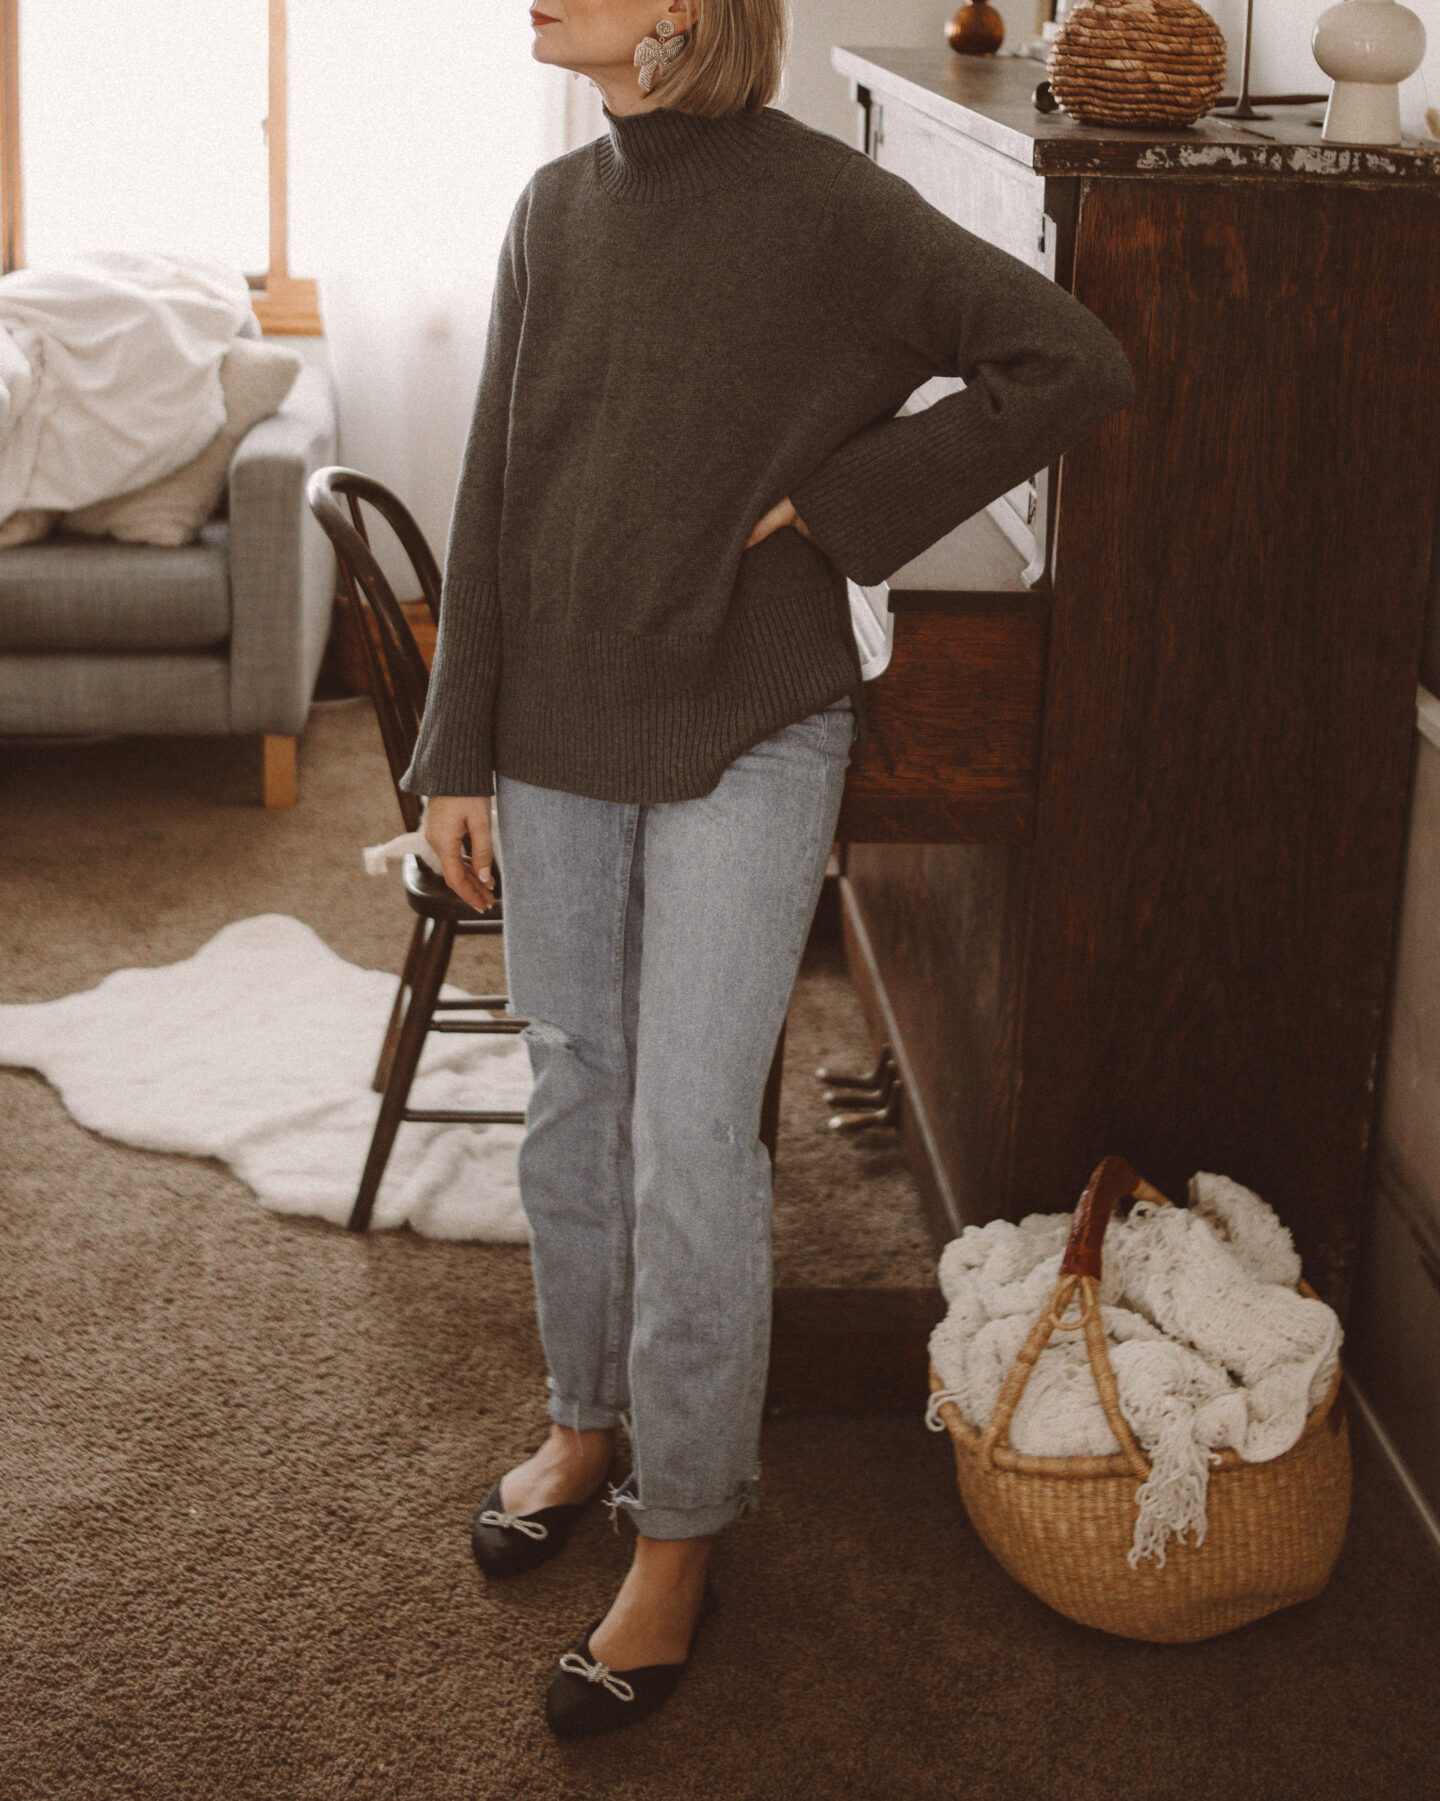 Karin Emily wears one of her  affordable sweaters and pairs of jeans from Walmart with a pair of bow embellished satin flats 